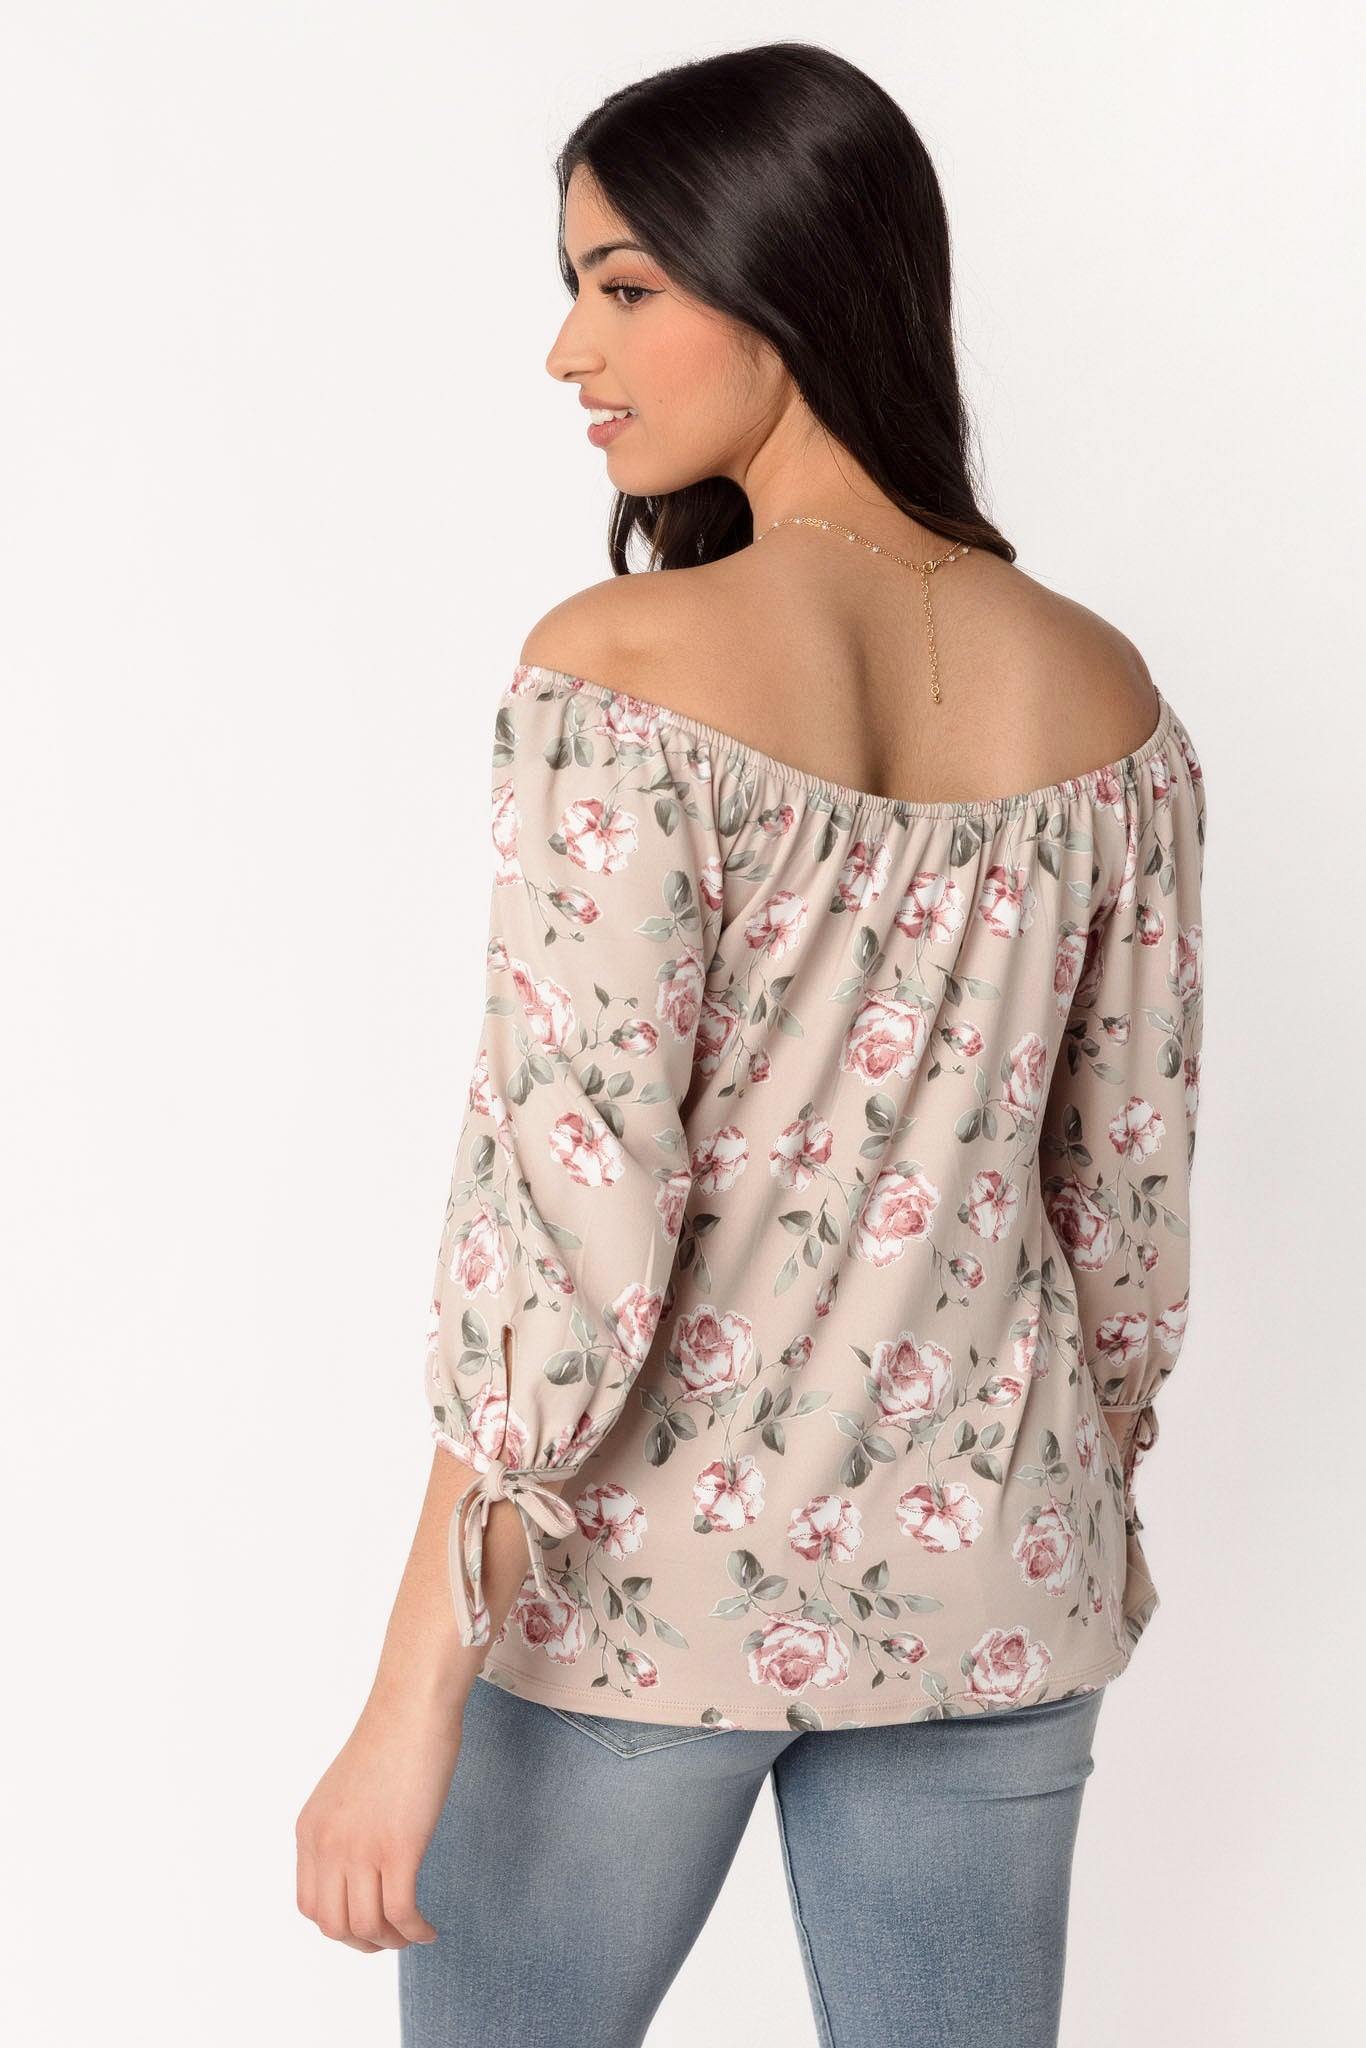 Rose Floral Top with 3/4 Length Sleeves